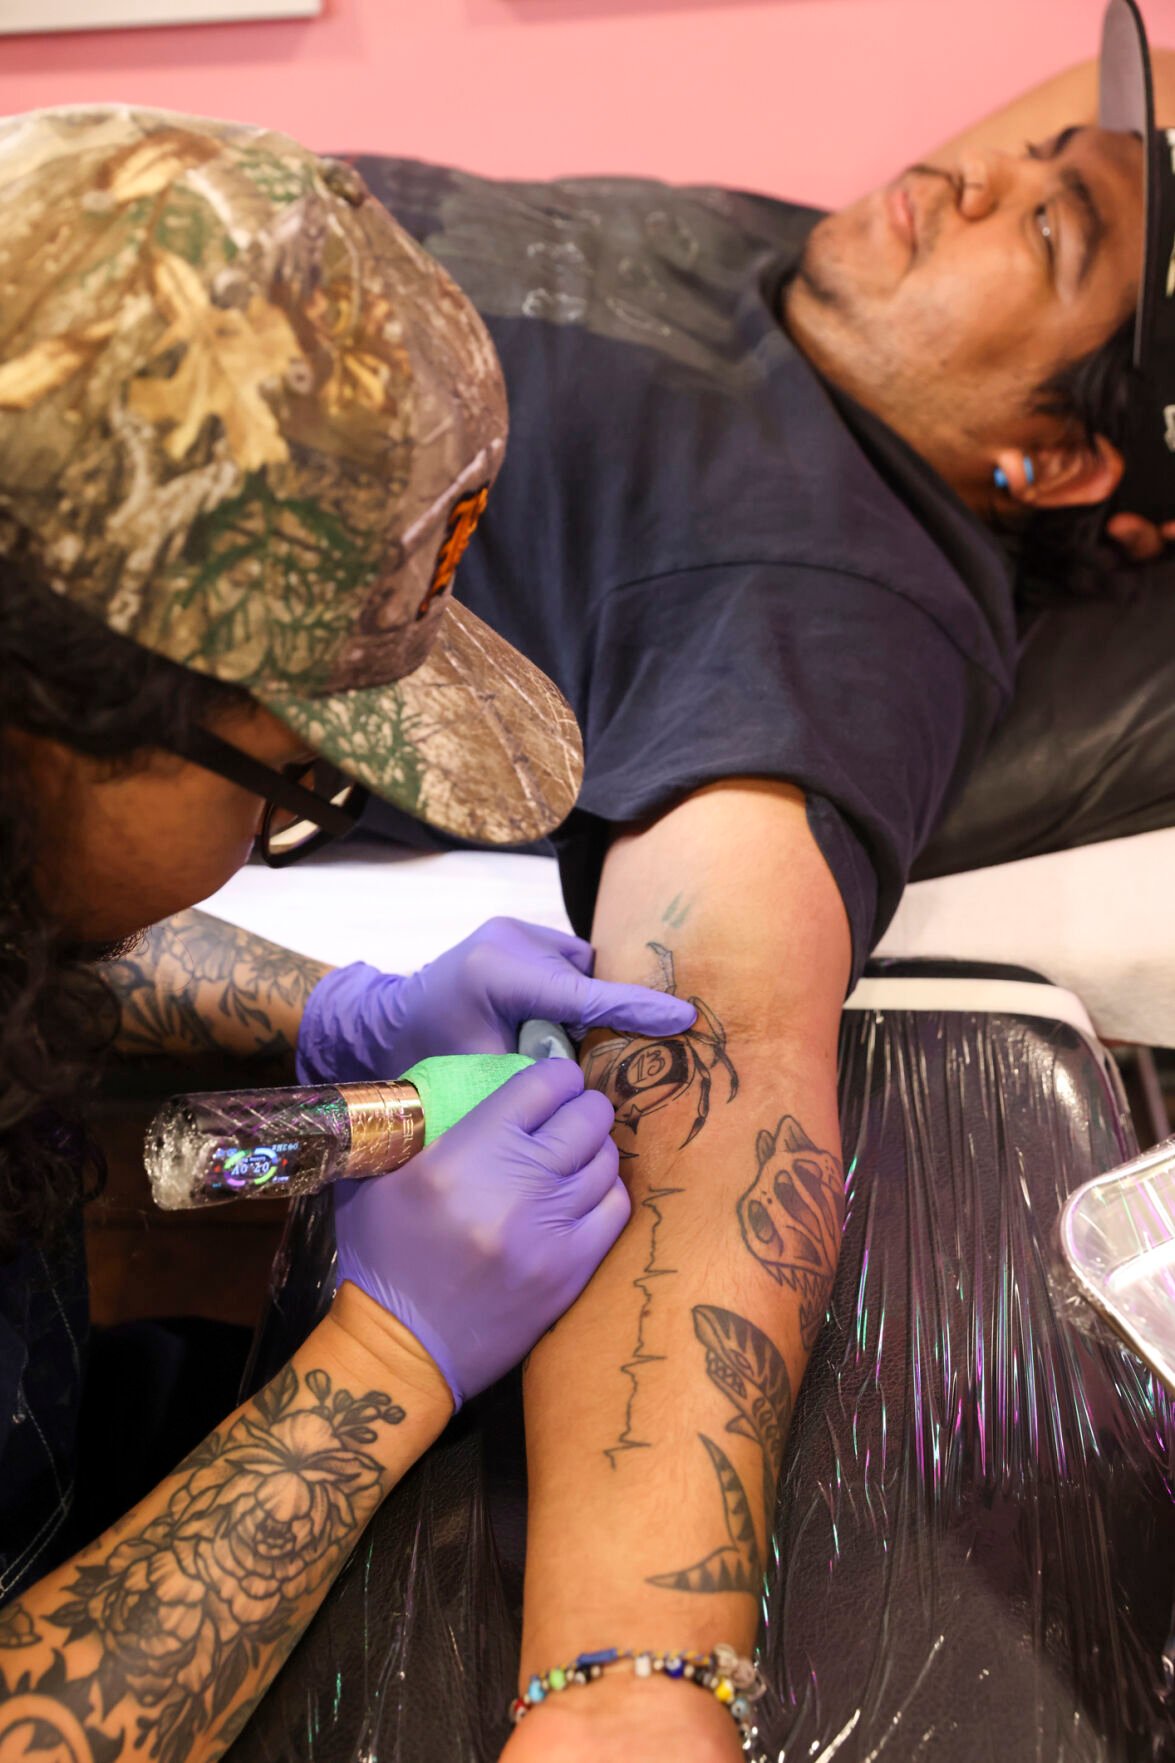 Photos: Omahans getting tattooed in the '90s